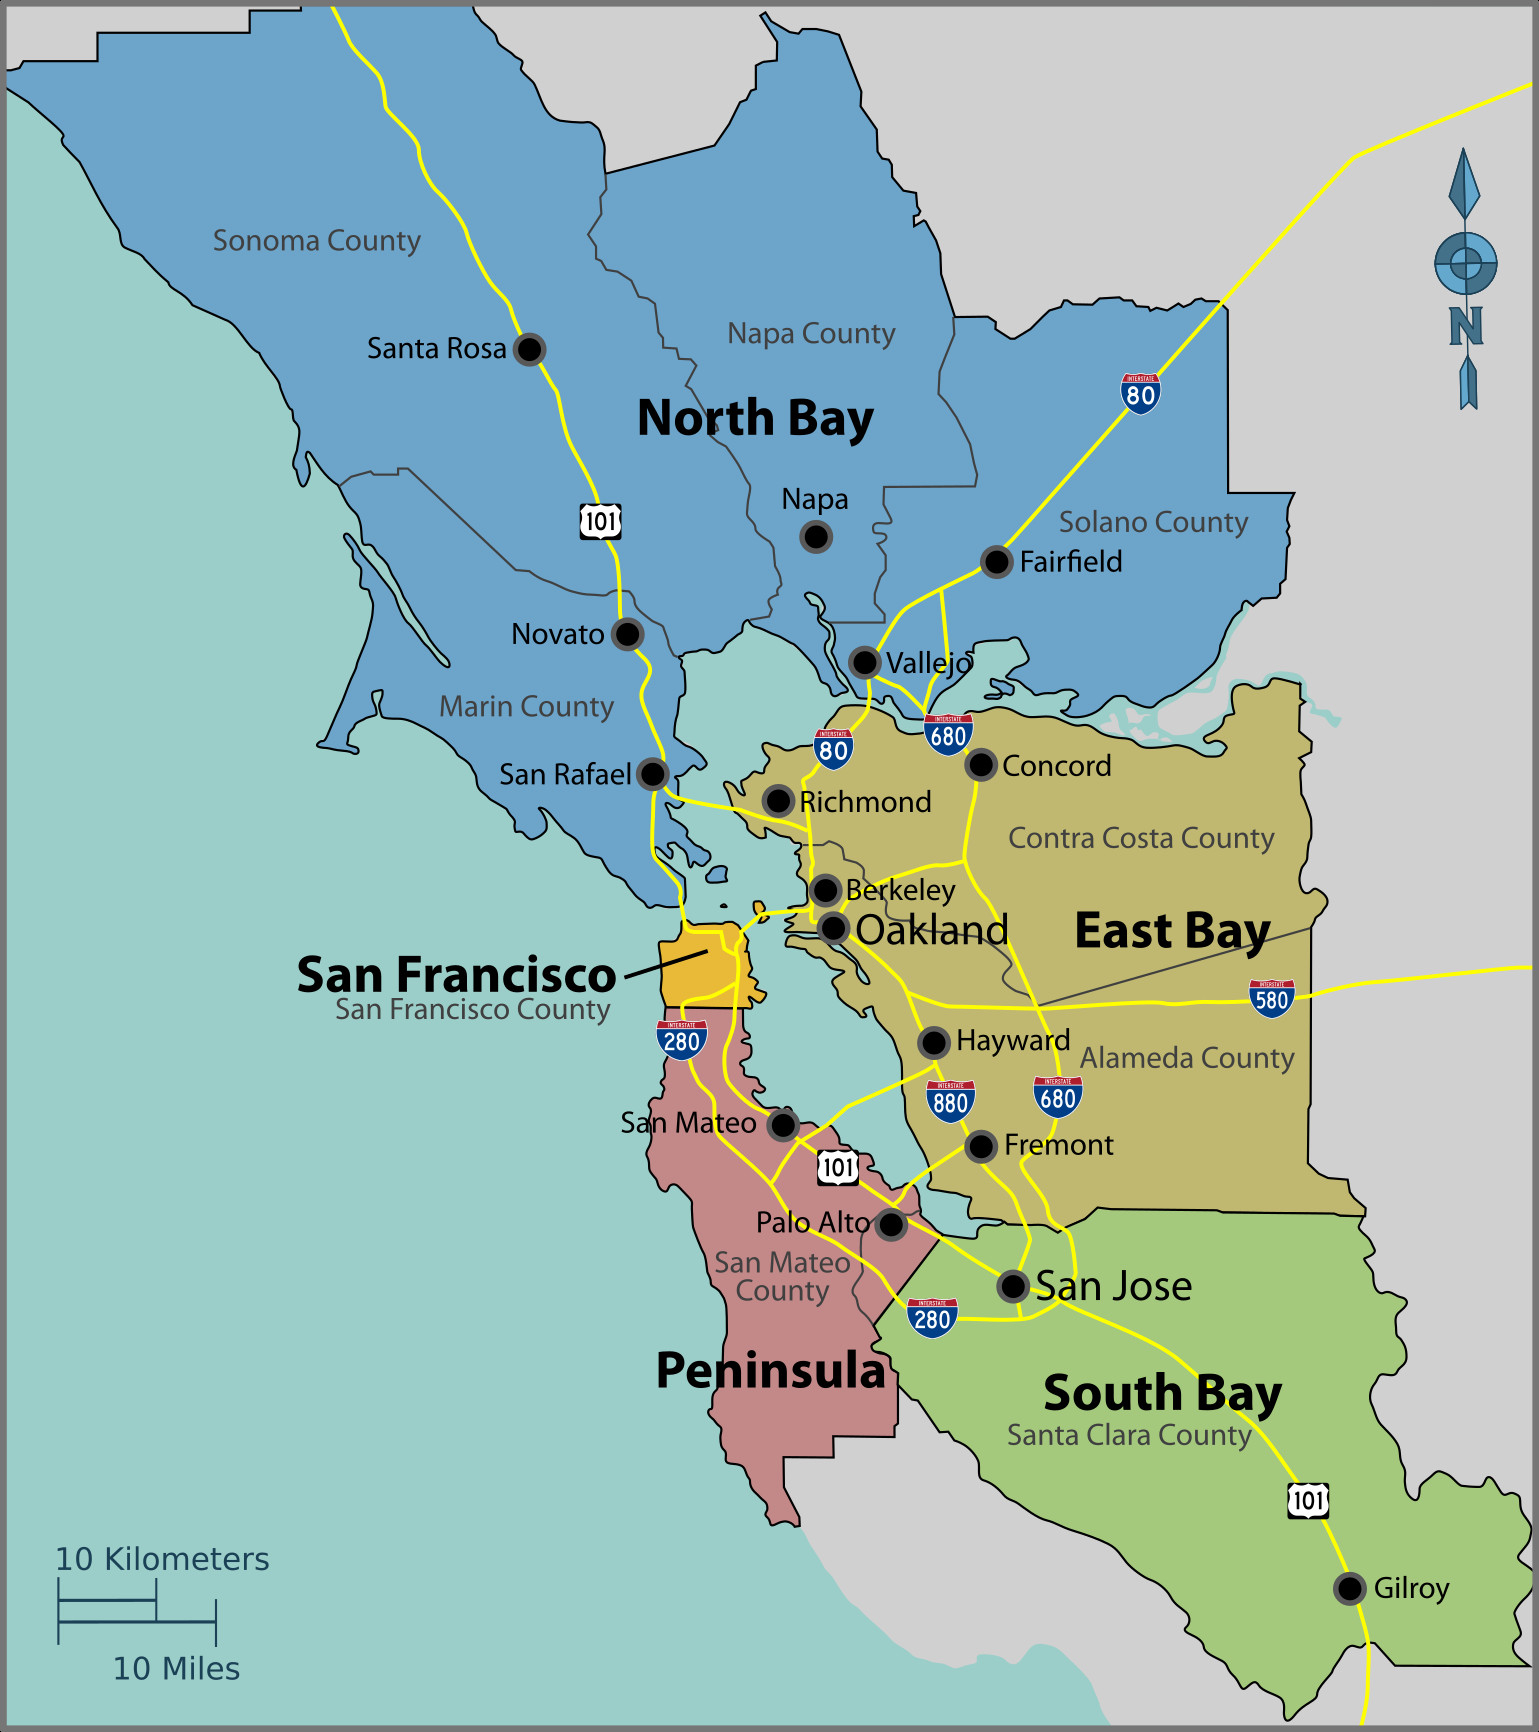 Where Is Fremont California On The Map Fresh San Francisco Bay Area - Fremont California Map